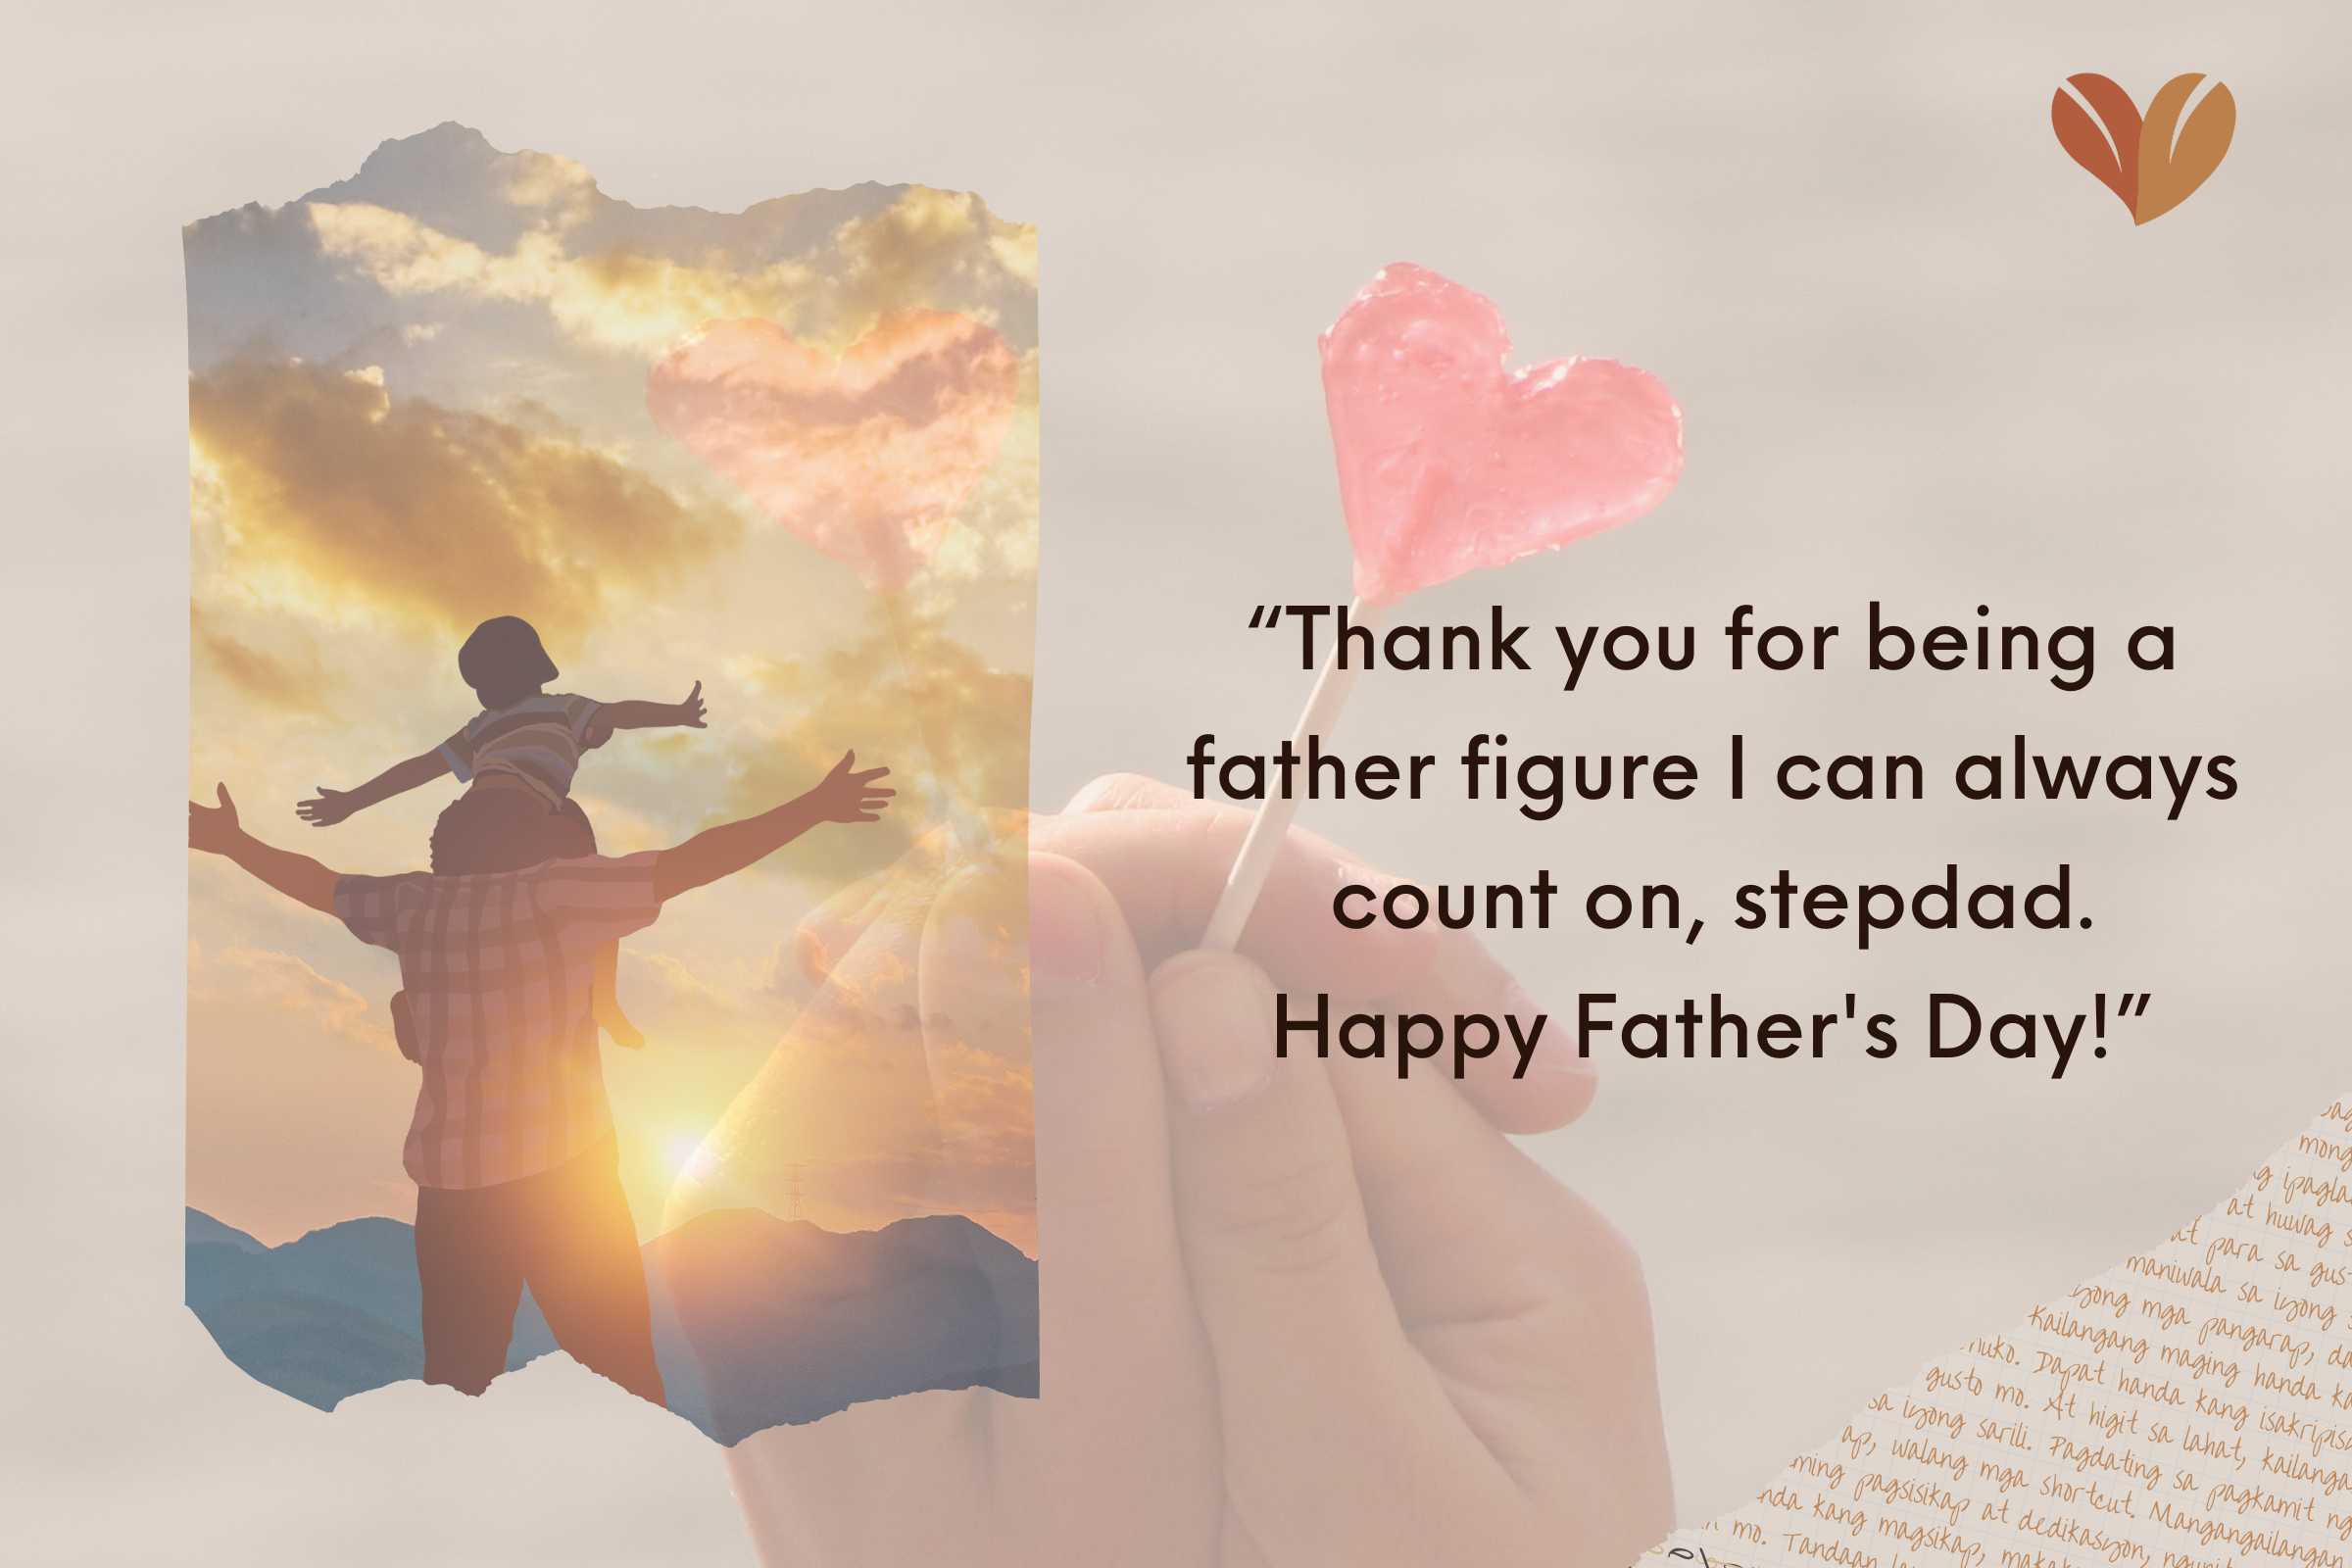 Quotes On Father's Day For Stepdad from Son